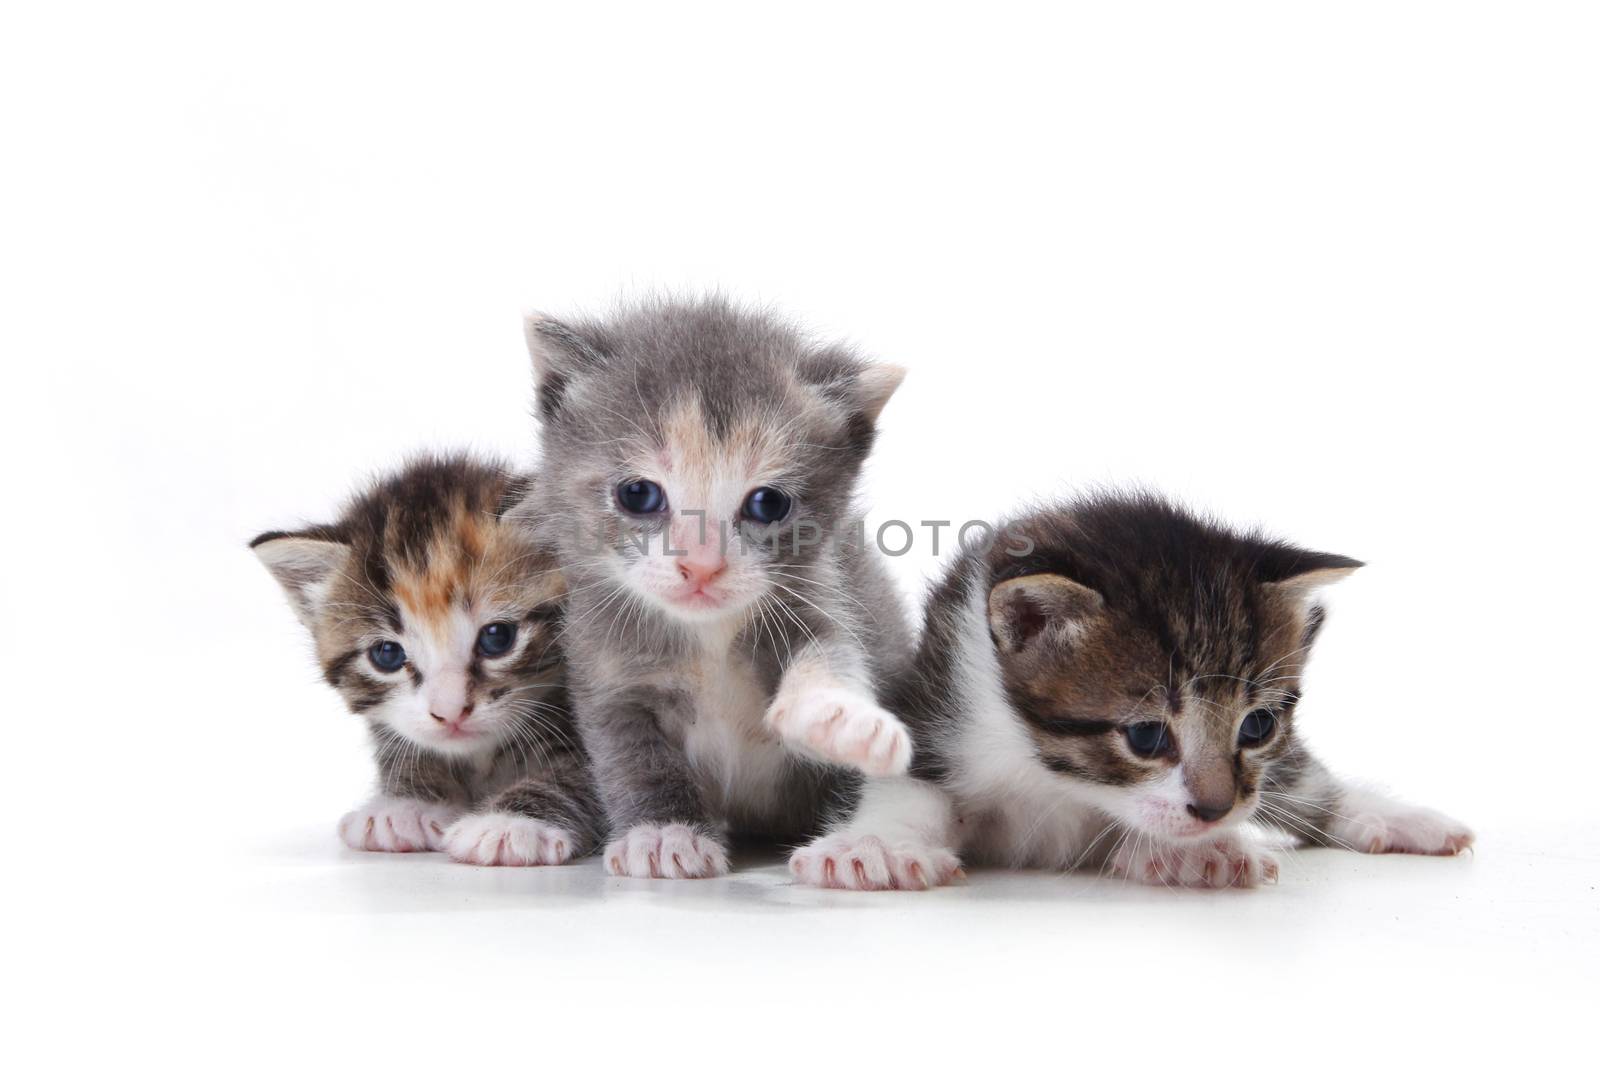 Adorable Newborn Kittens on a White Background by tobkatrina